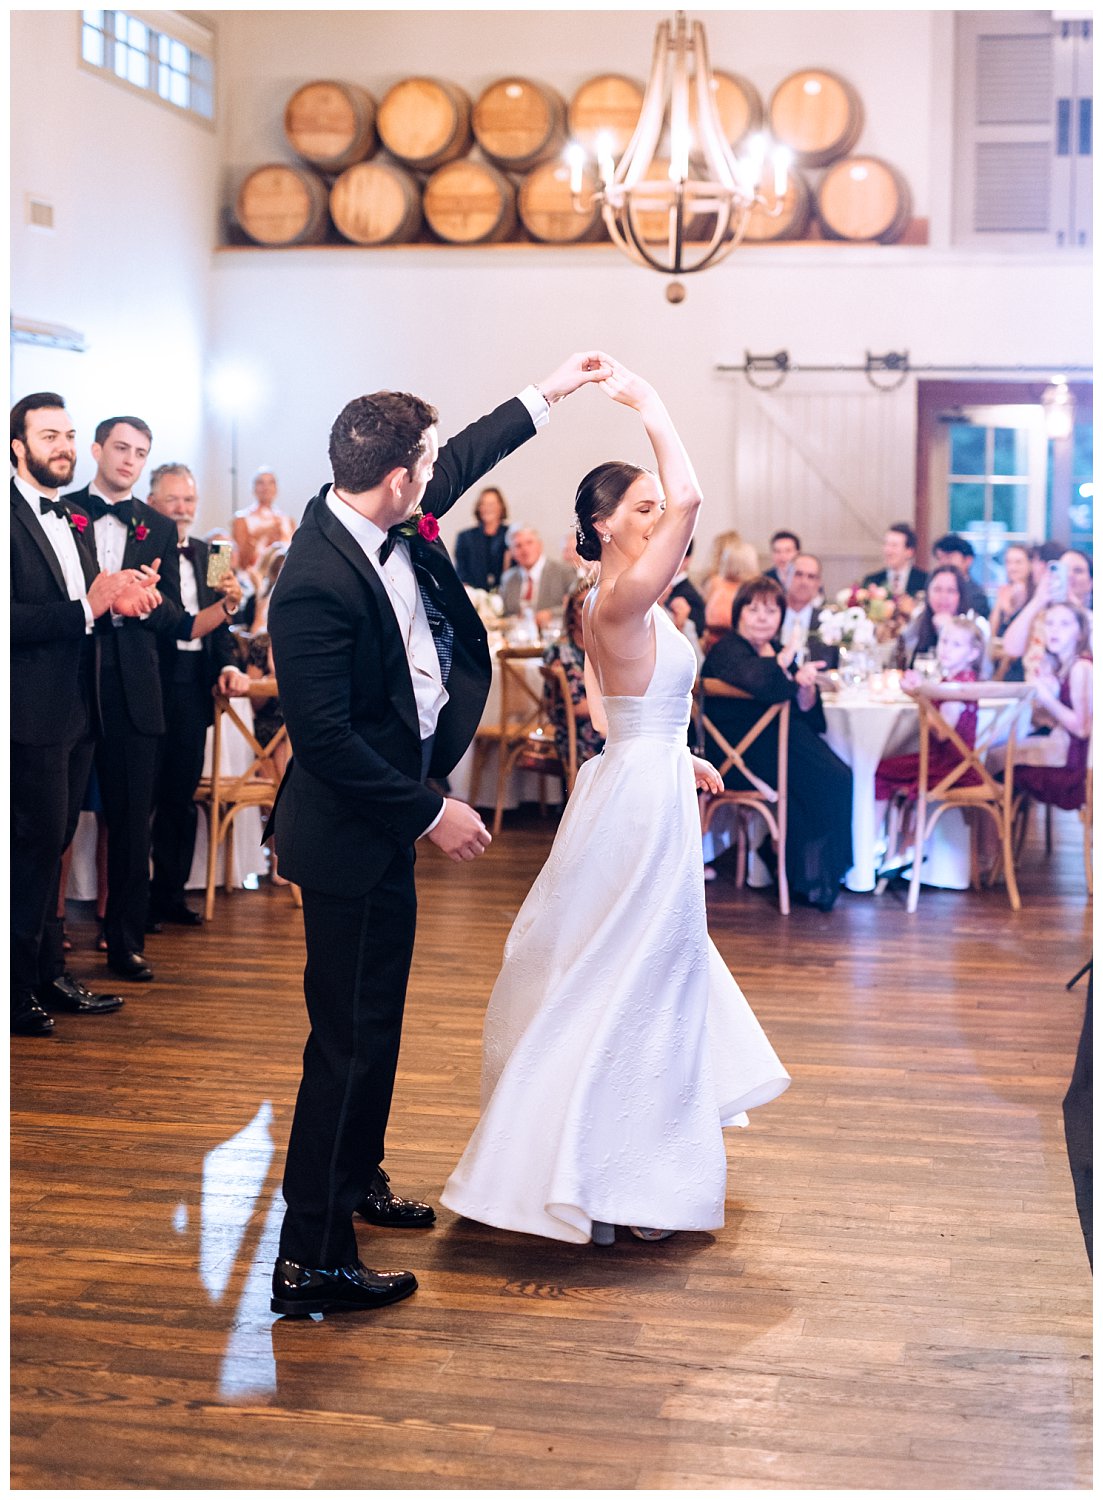 Bride and groom first dance at King Family Vineyard